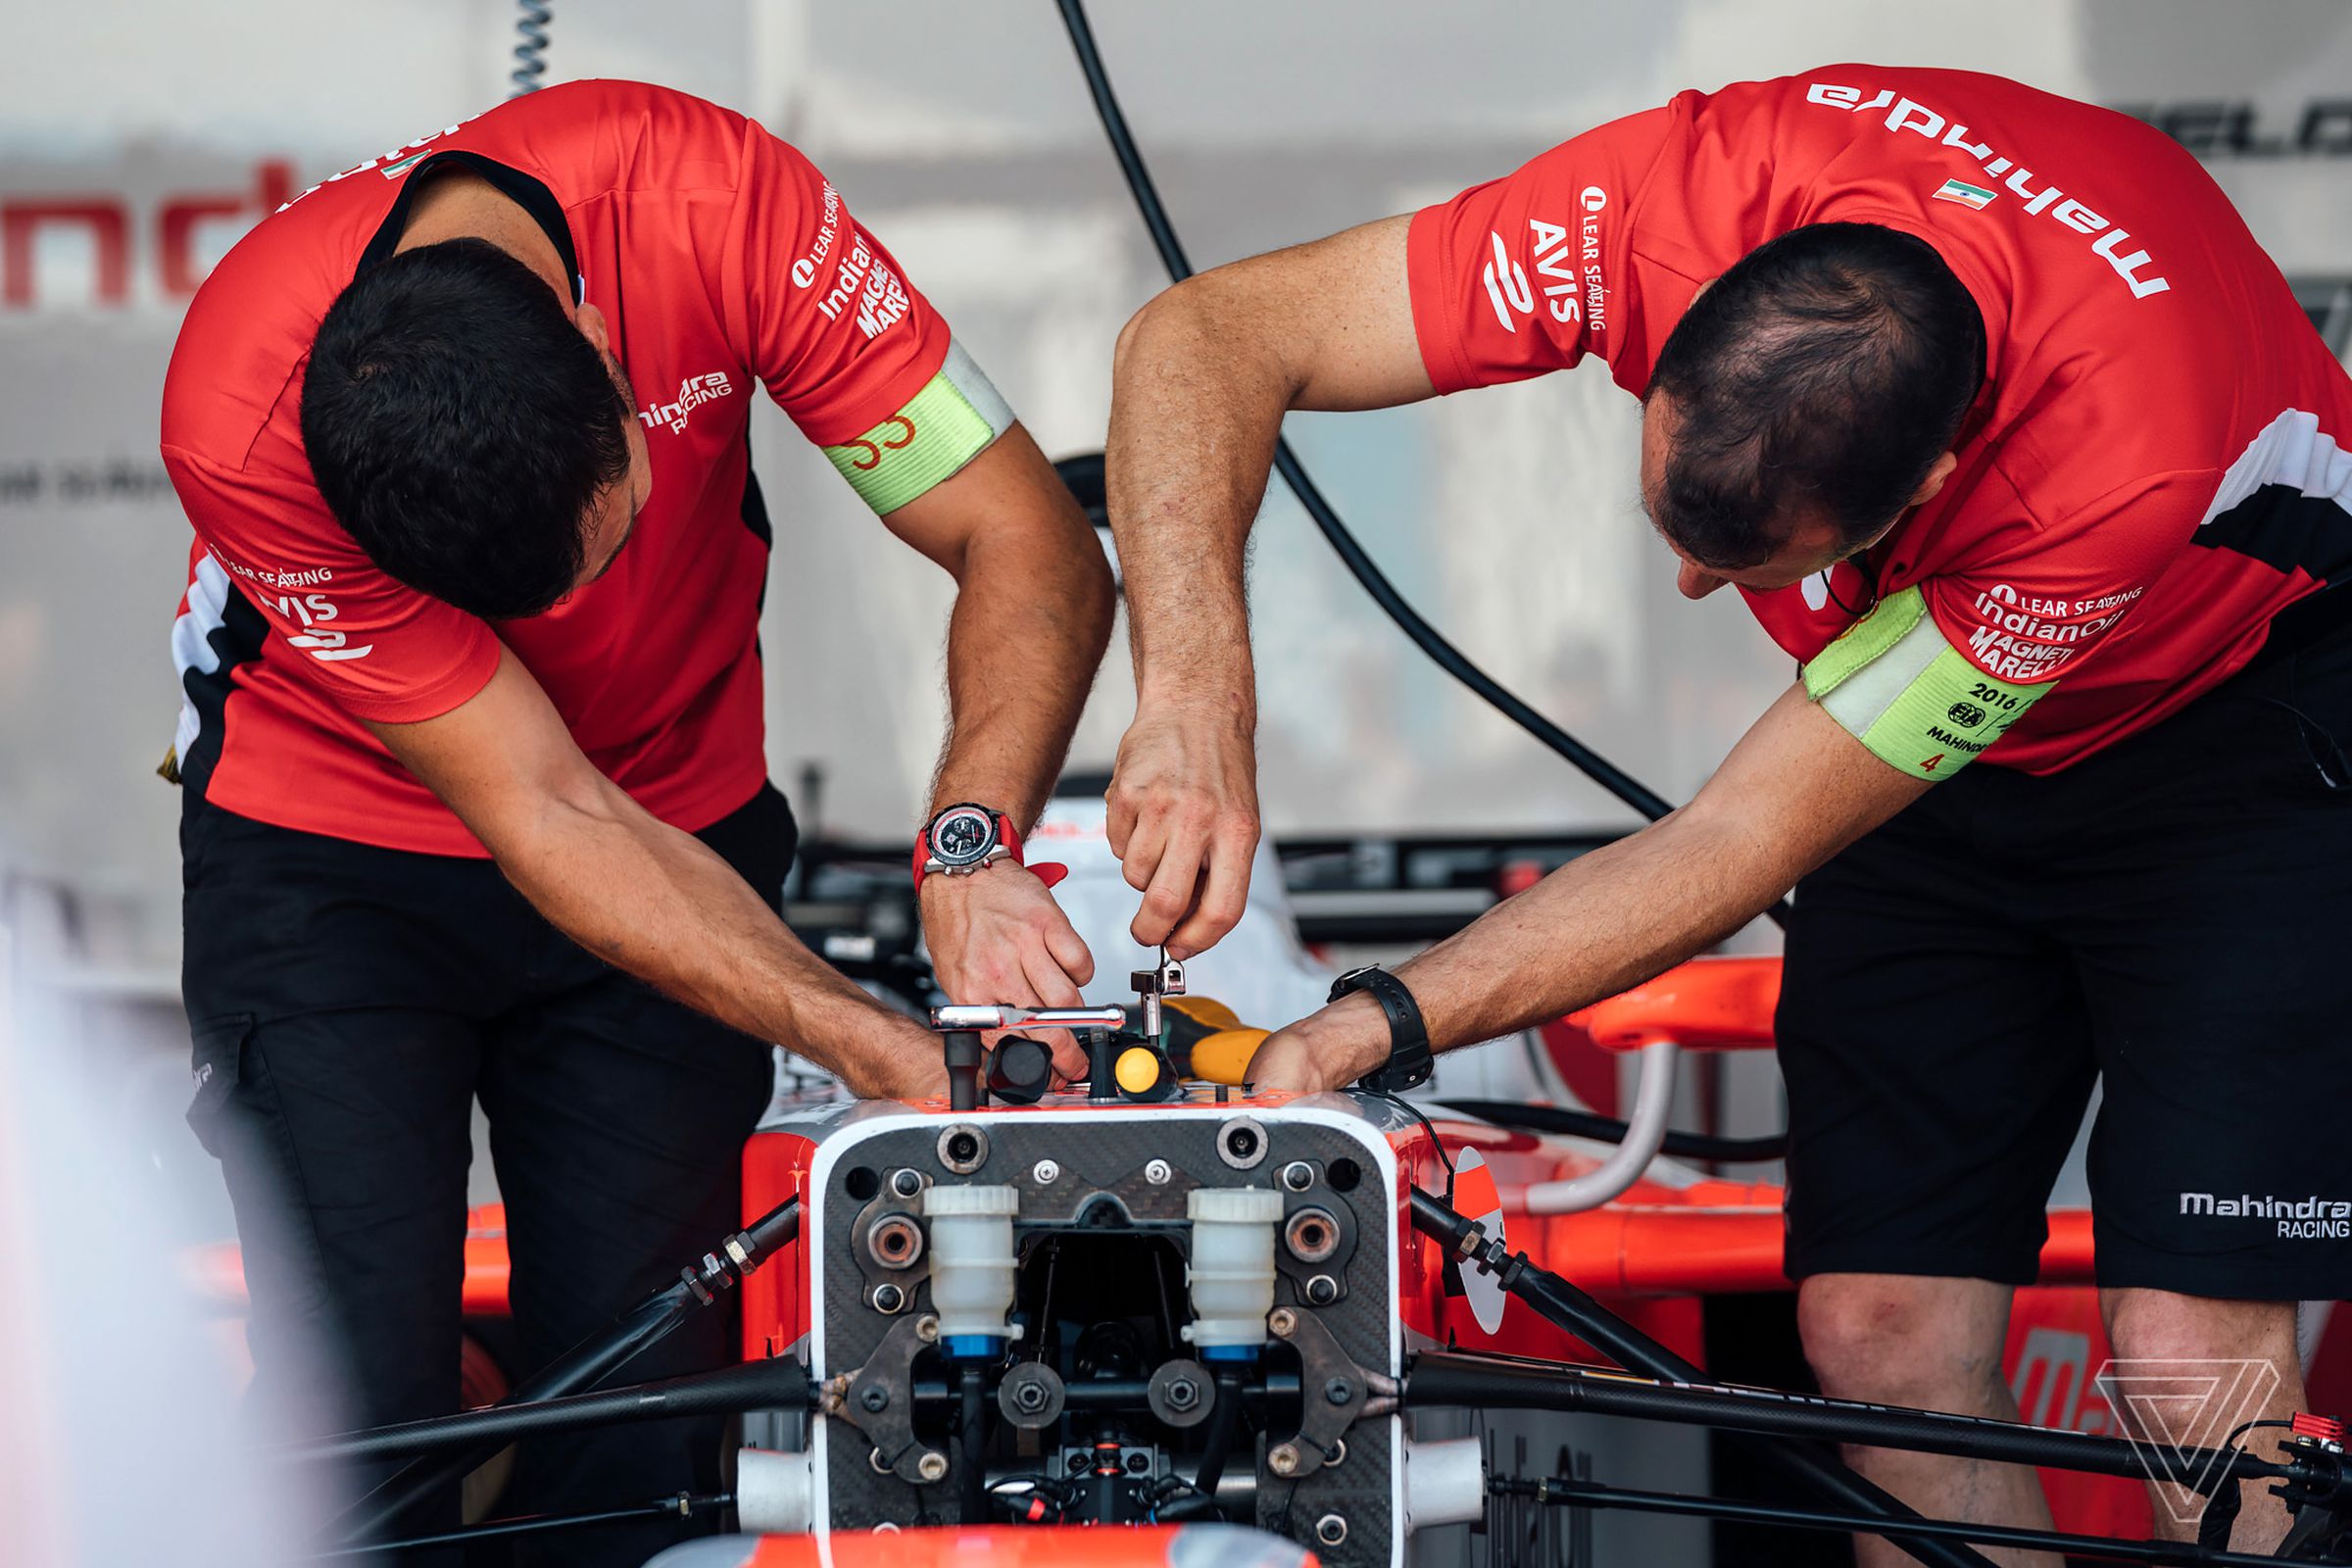 Crew members for Nick Heidfeld’s #23 Mahindra Racing car go to work on the front suspension in between practice sessions.